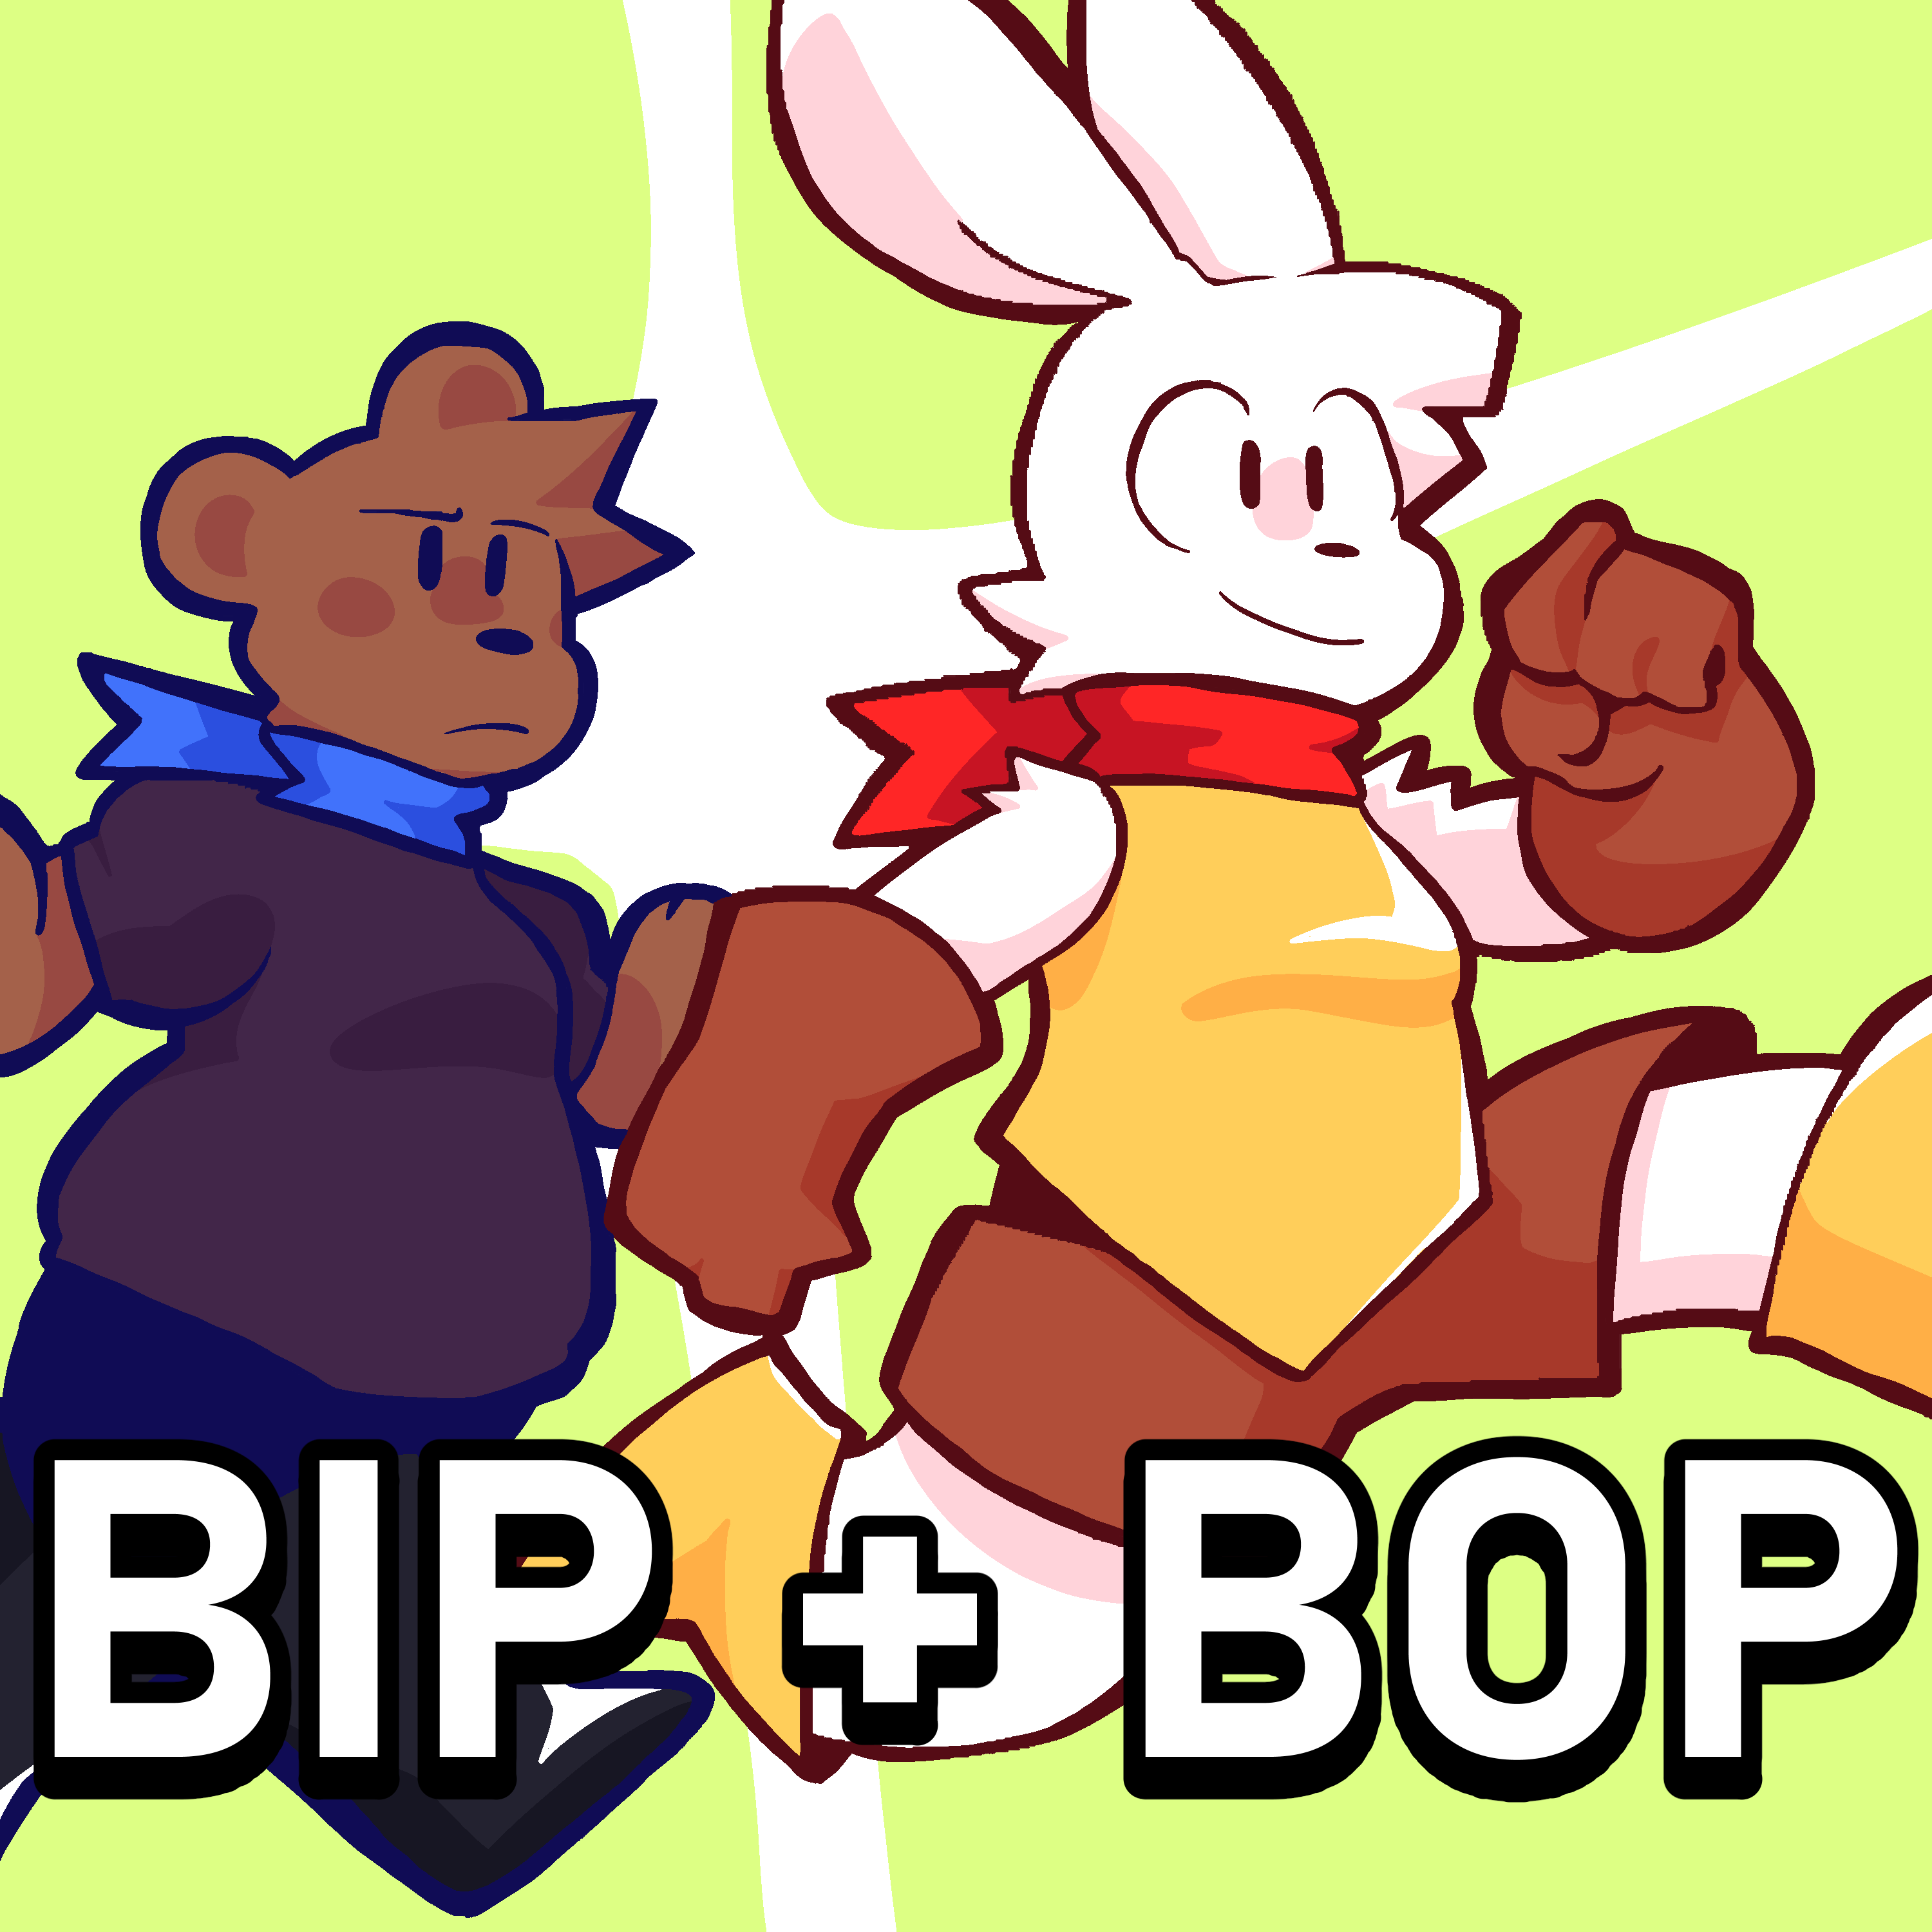 Bip the Rabbit and Bop the Bear are shown running against a lime green background. 'Bip + Bop' is written in bold text at the bottom of the image.